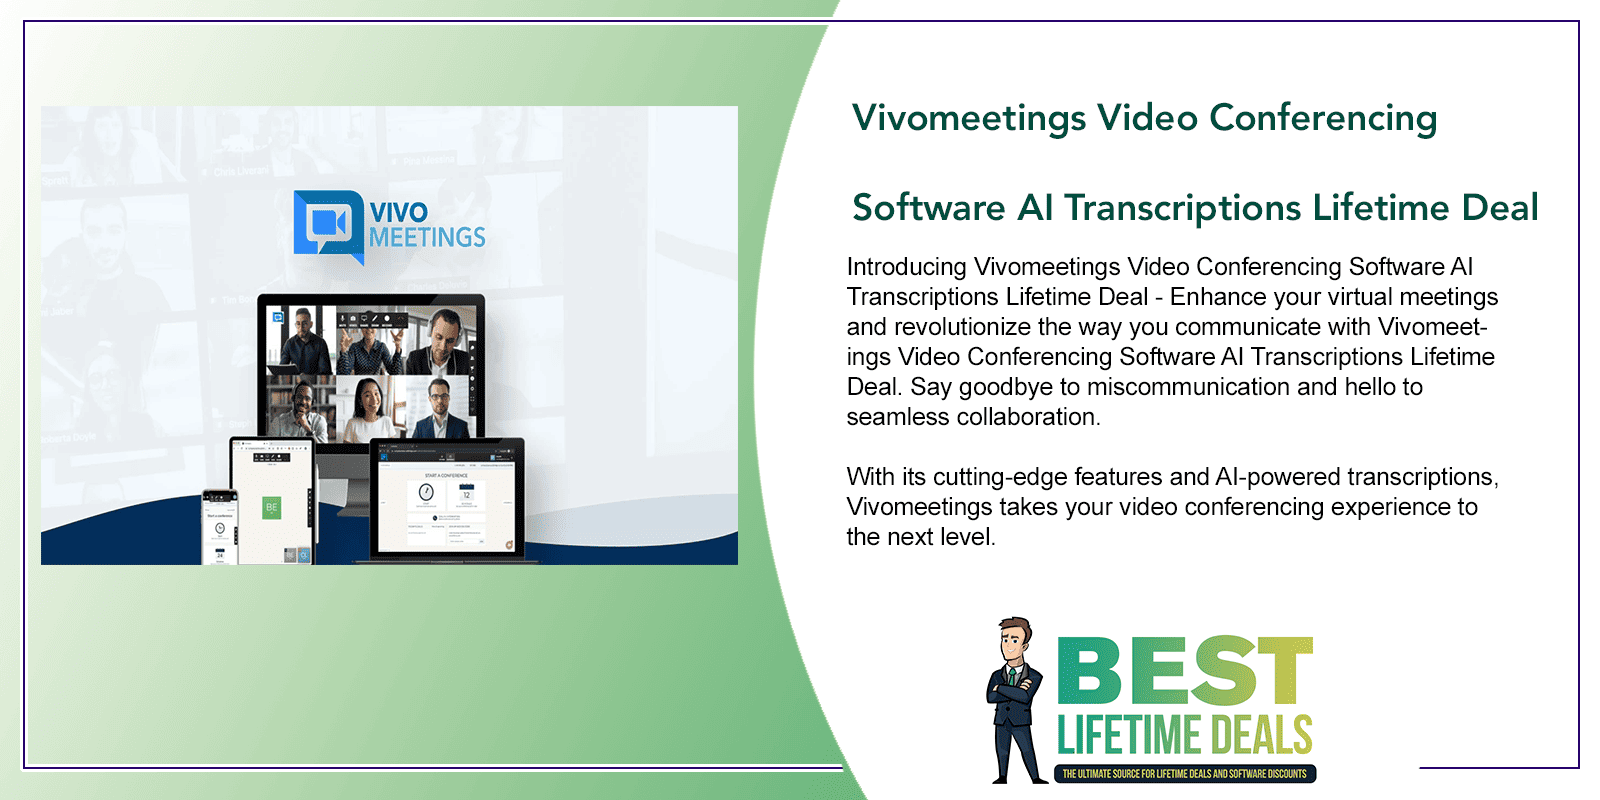 Vivomeetings Video Conferencing Software AI Transcriptions Lifetime Deal Featured Image